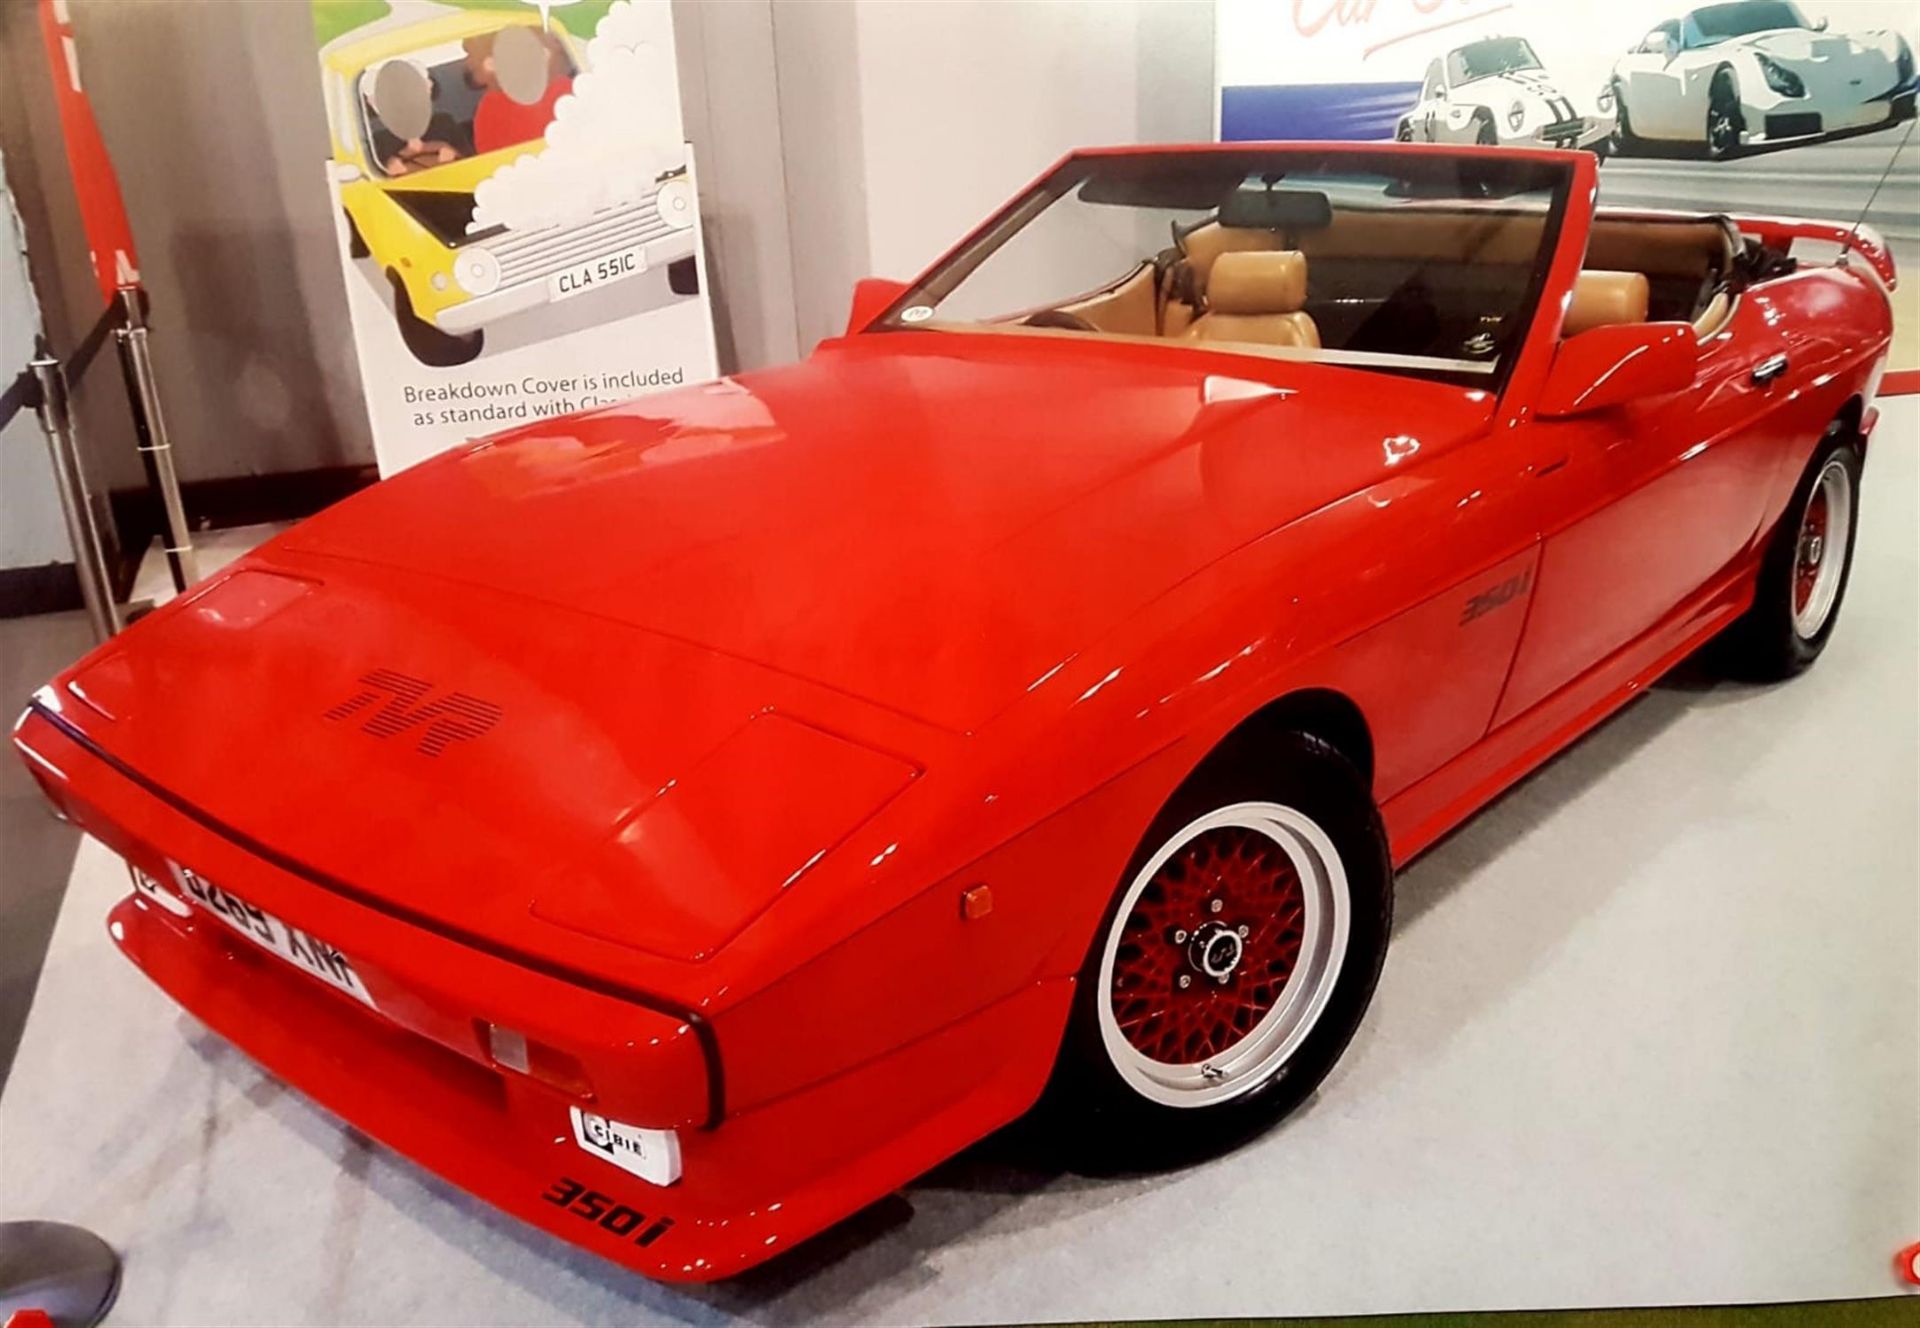 1986 TVR 350i Convertible - Image 2 of 4